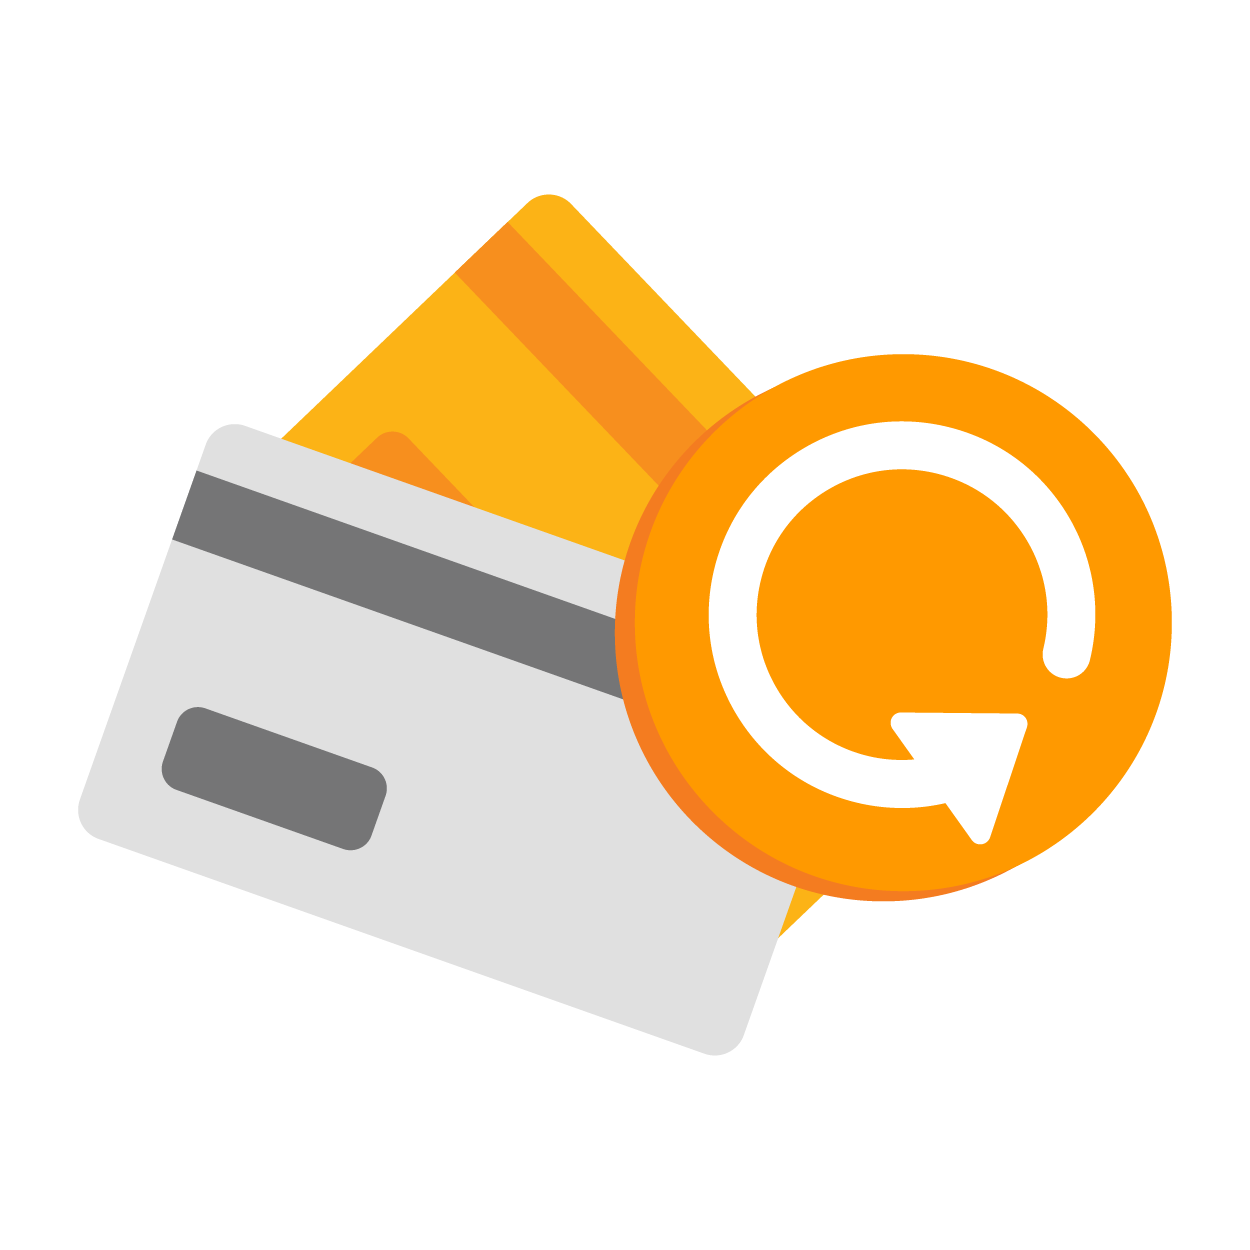 Download PNG image - Payment Download PNG Image 